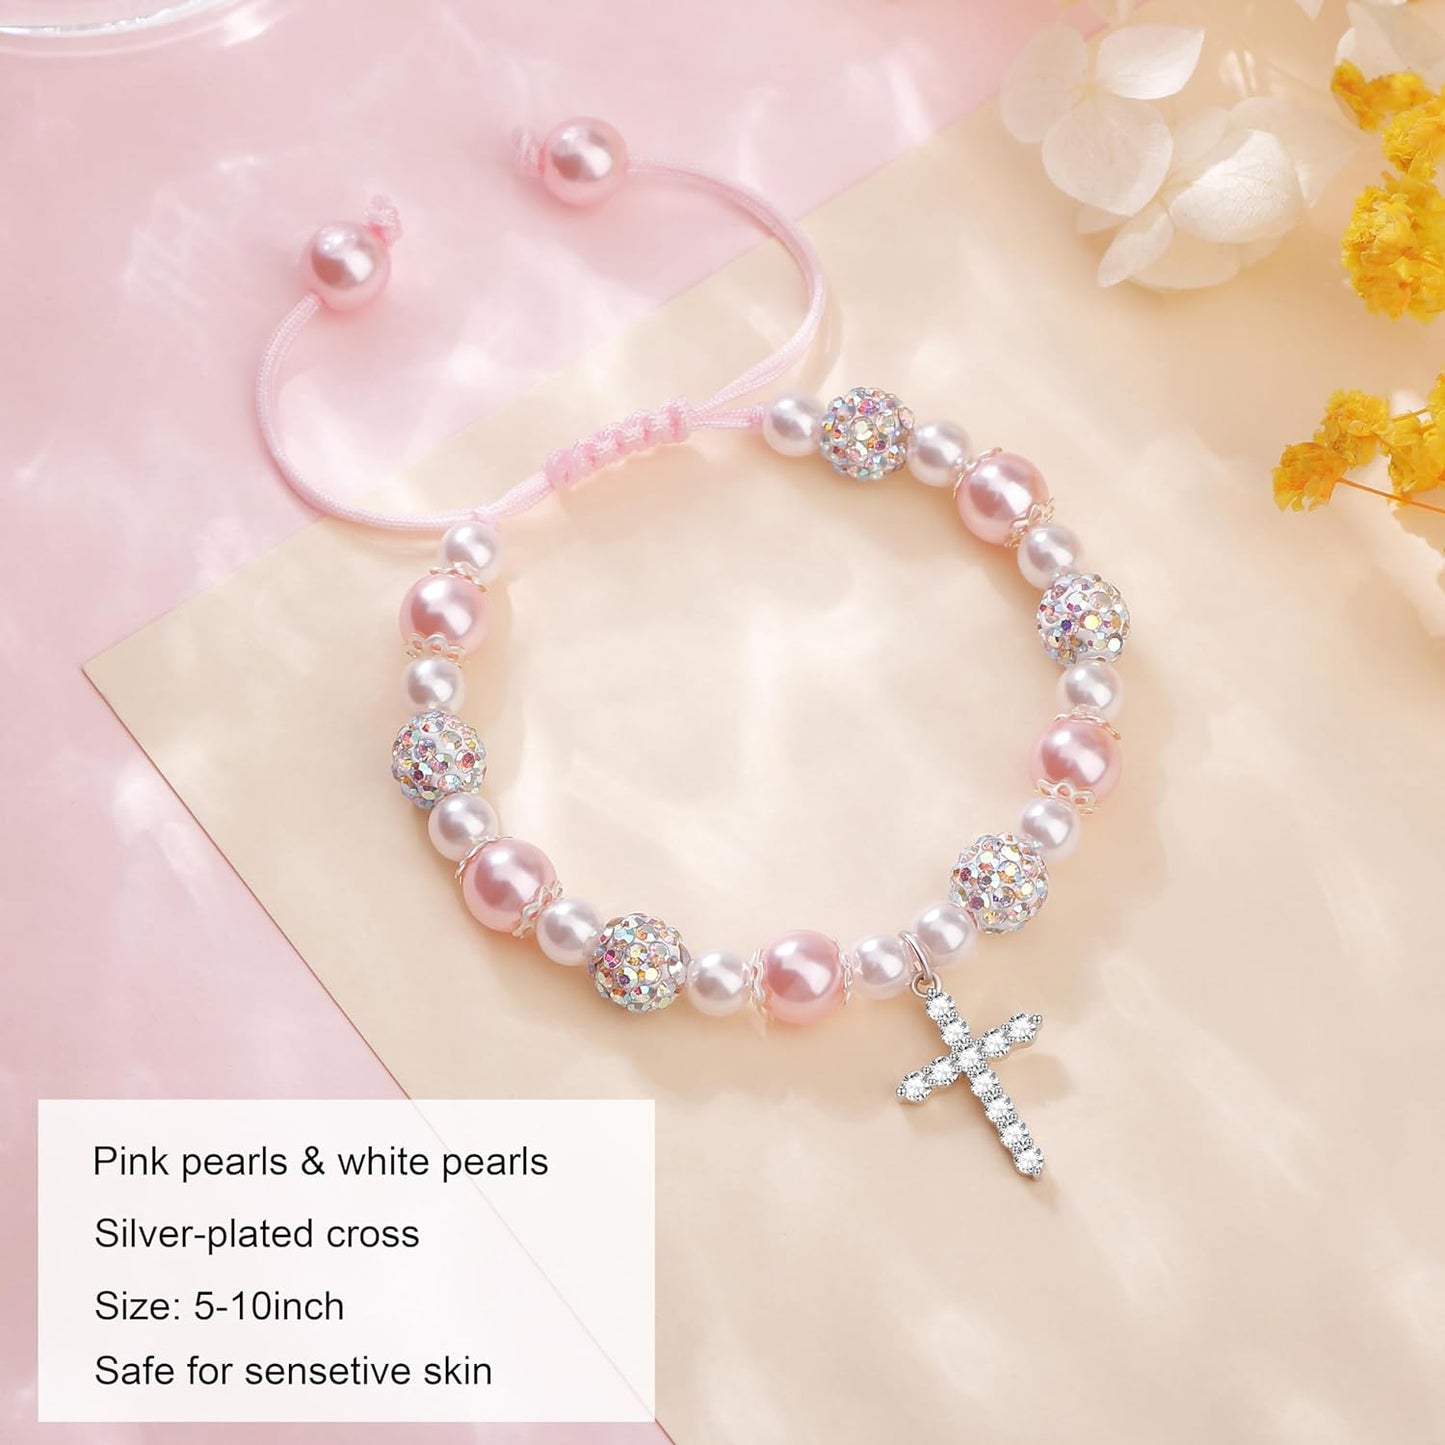 Christian Cross Bracelet Perfect Baptism, Holy Communion, Confirmation Gift for Young Girls claimedbygoddesigns